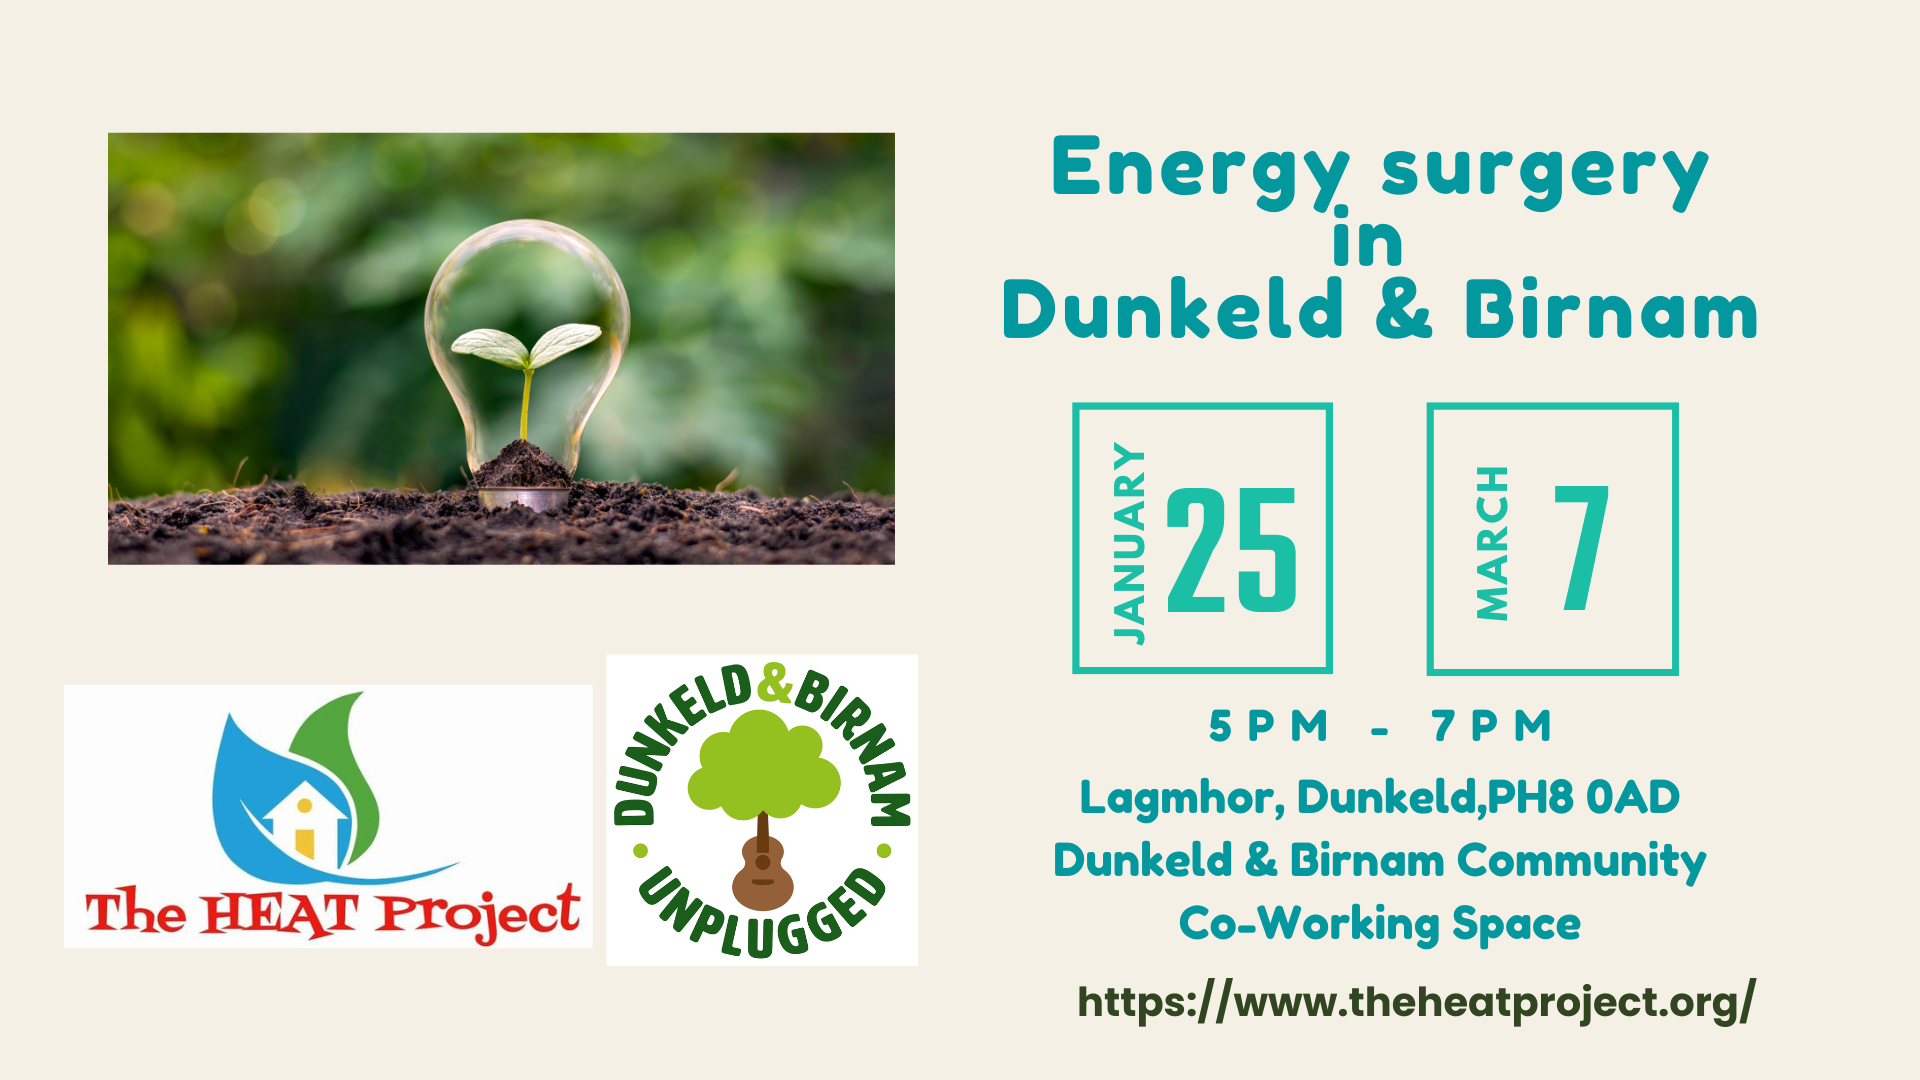 The-HEAT-Project-Energy-surgery-at-Climate-Caffee-Dunkeld-Birnam